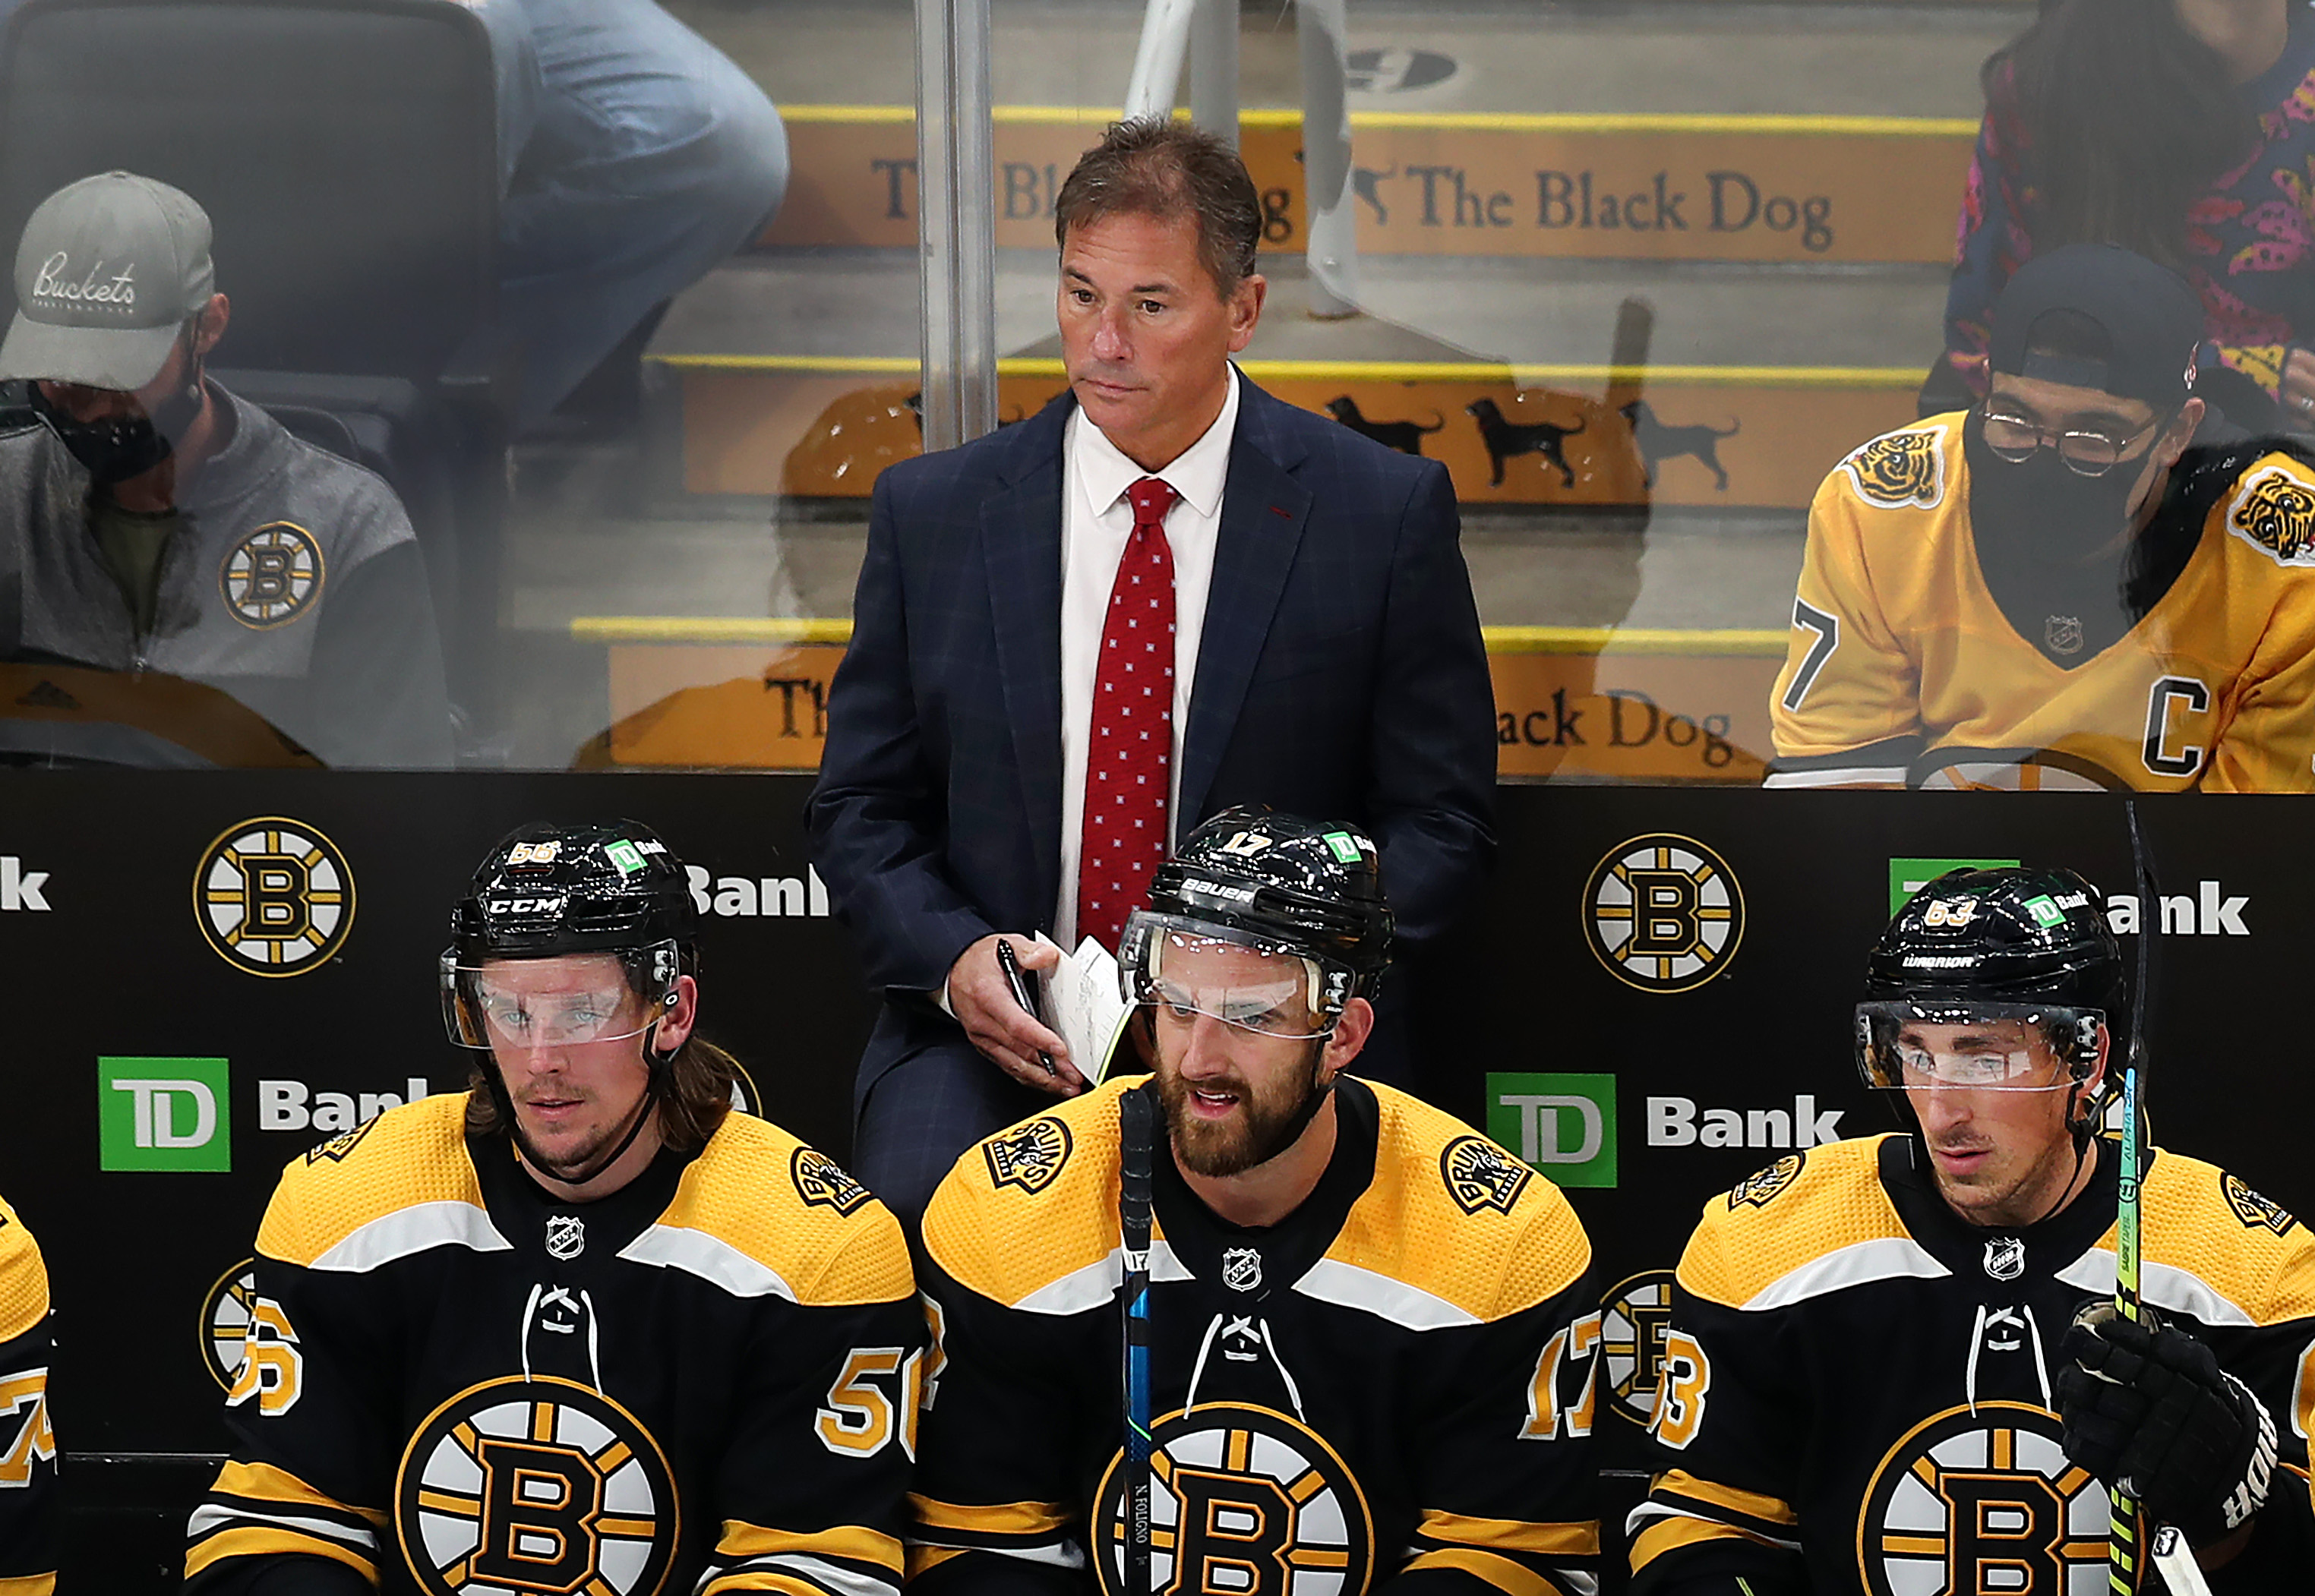 Bruce Cassidy returns to Bruins, but COVID concerns have the team taking  extra precautions - The Boston Globe